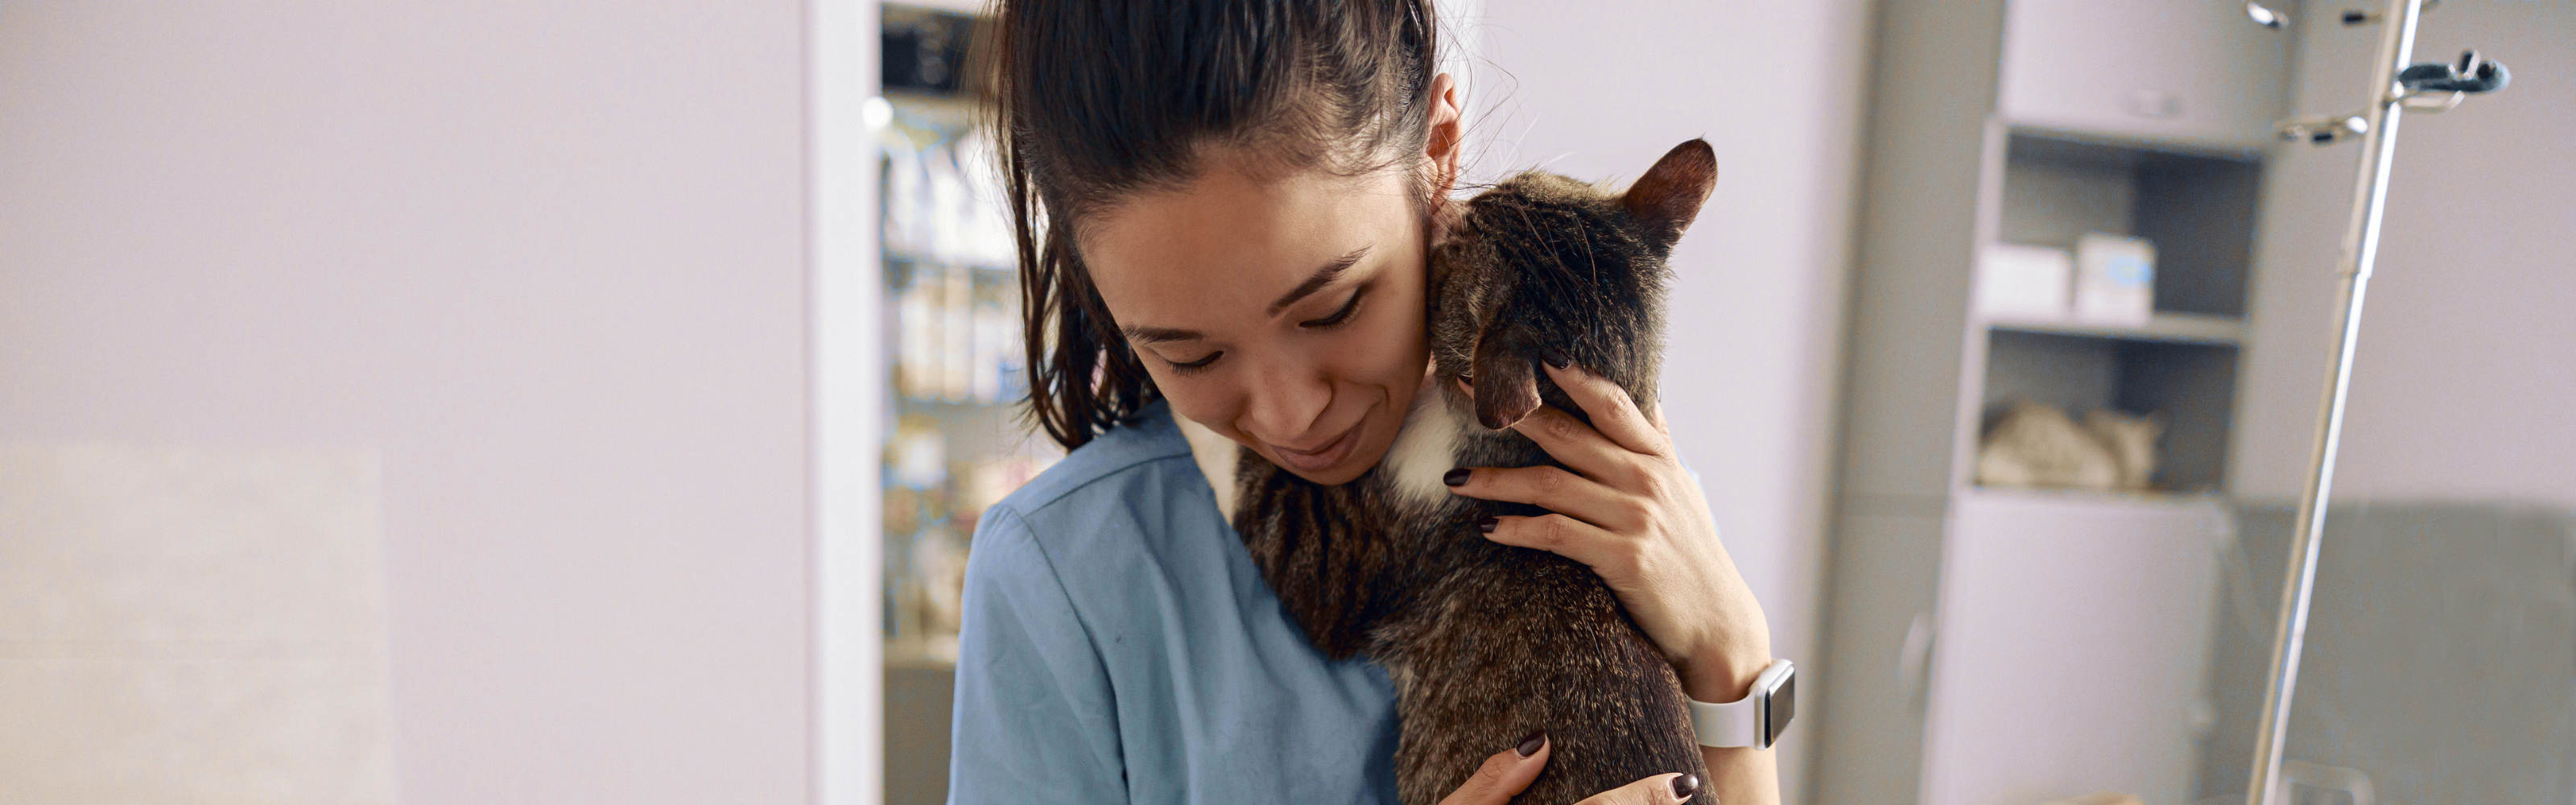 Better veterinary visits for cats